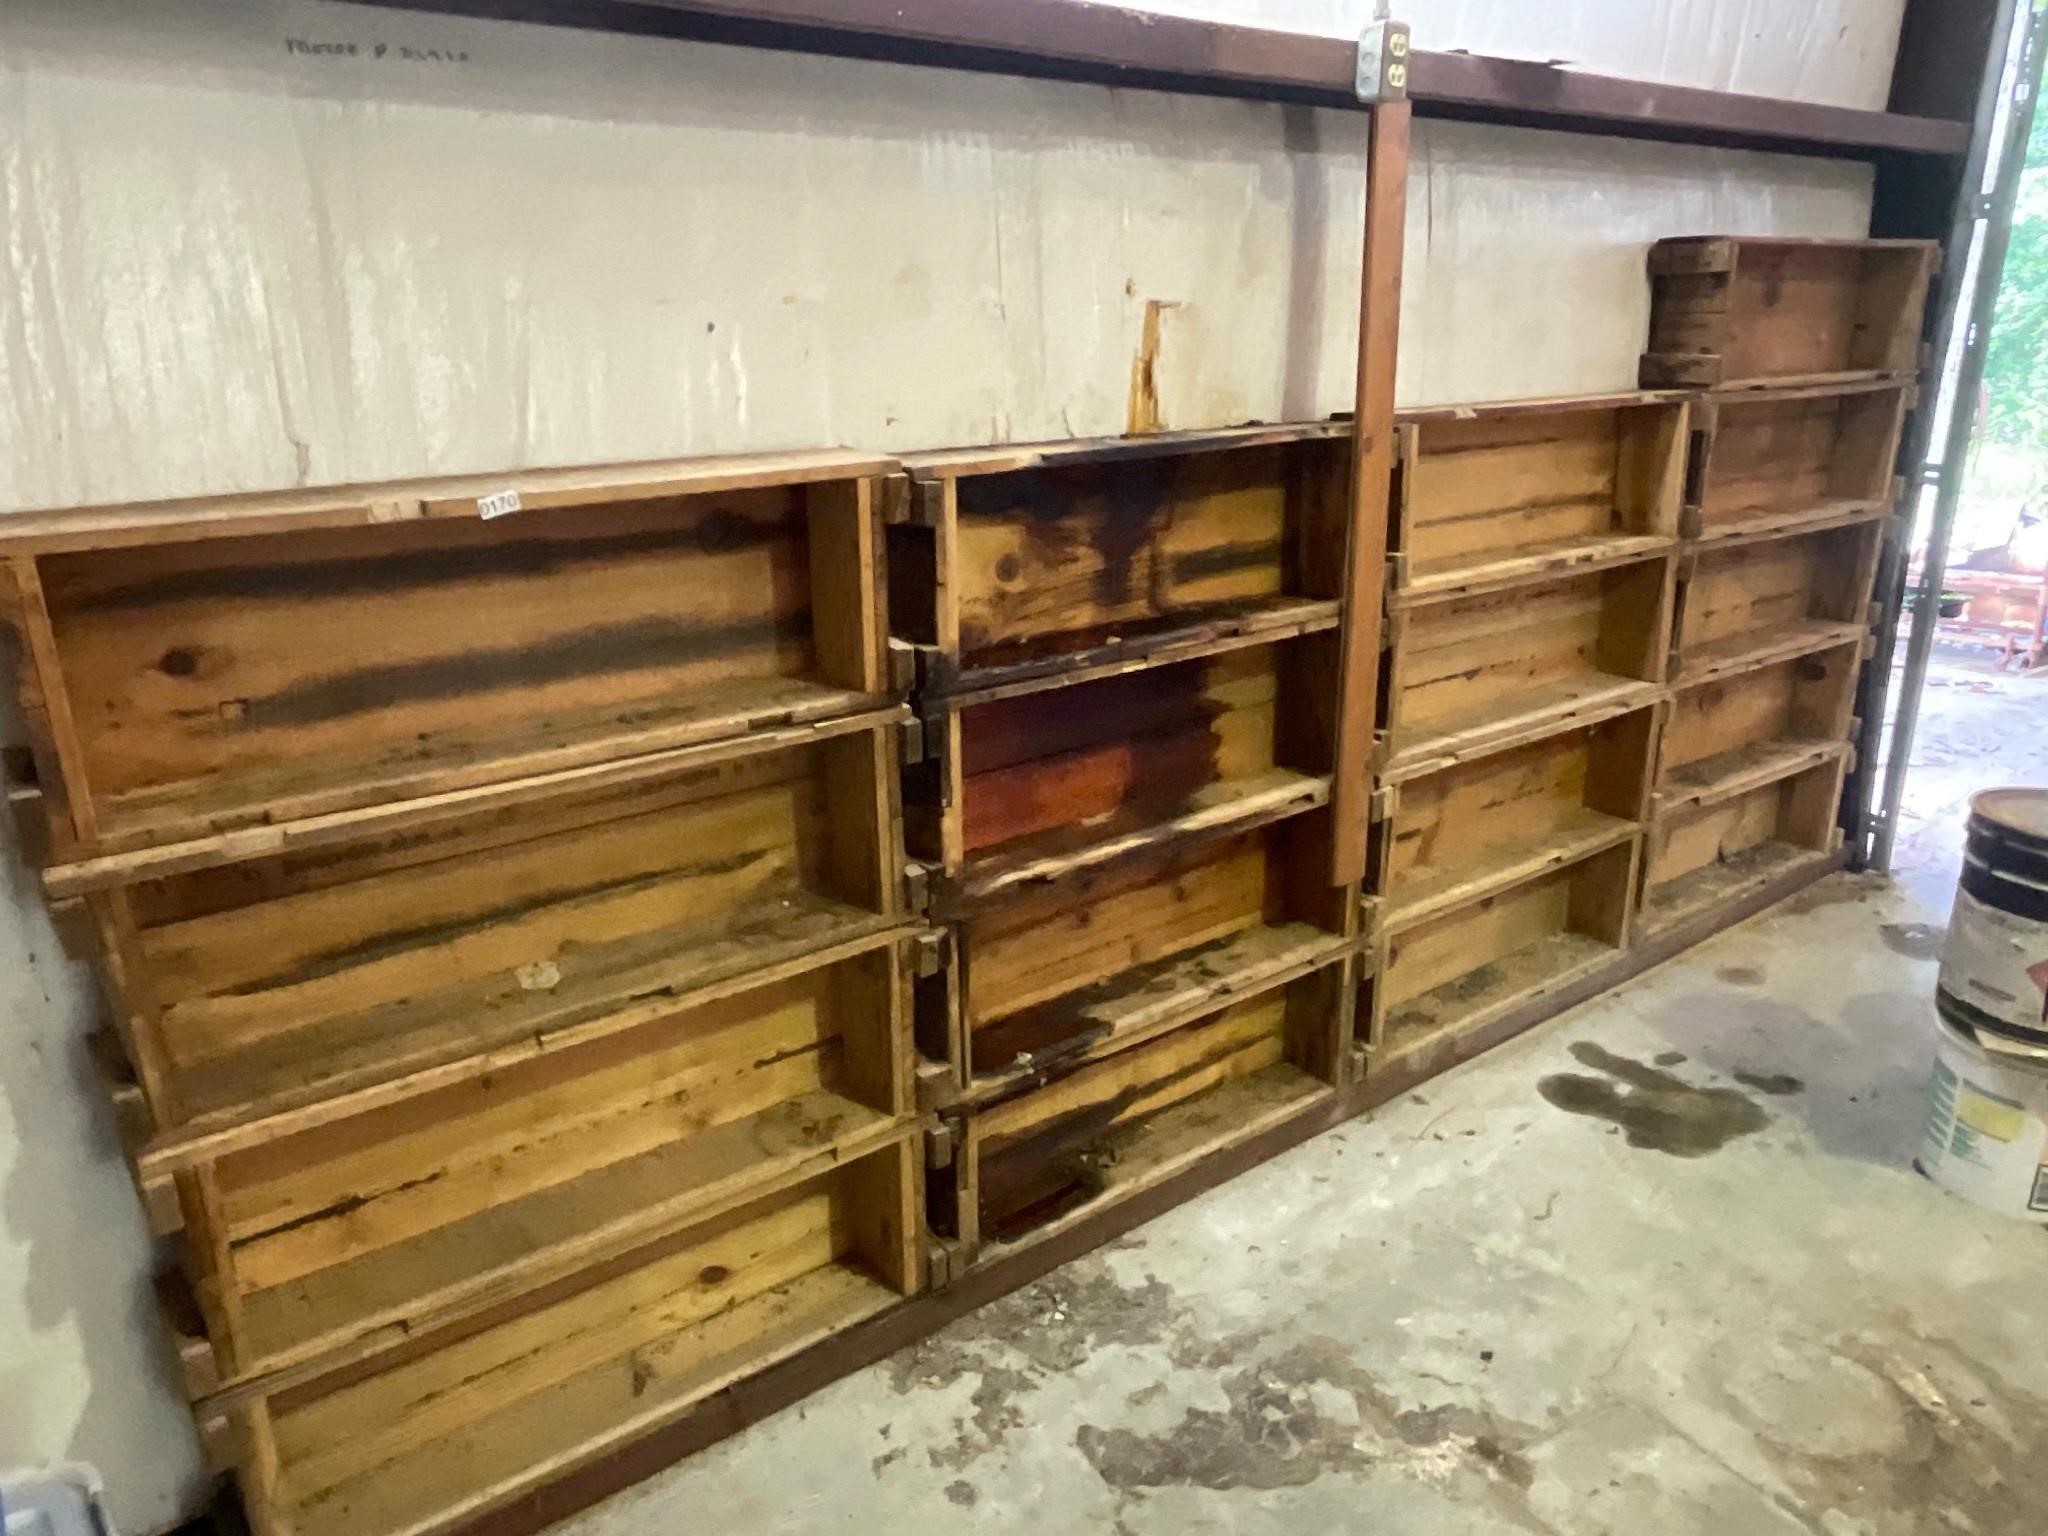 17 wooden ammo boxes- turned into shelves